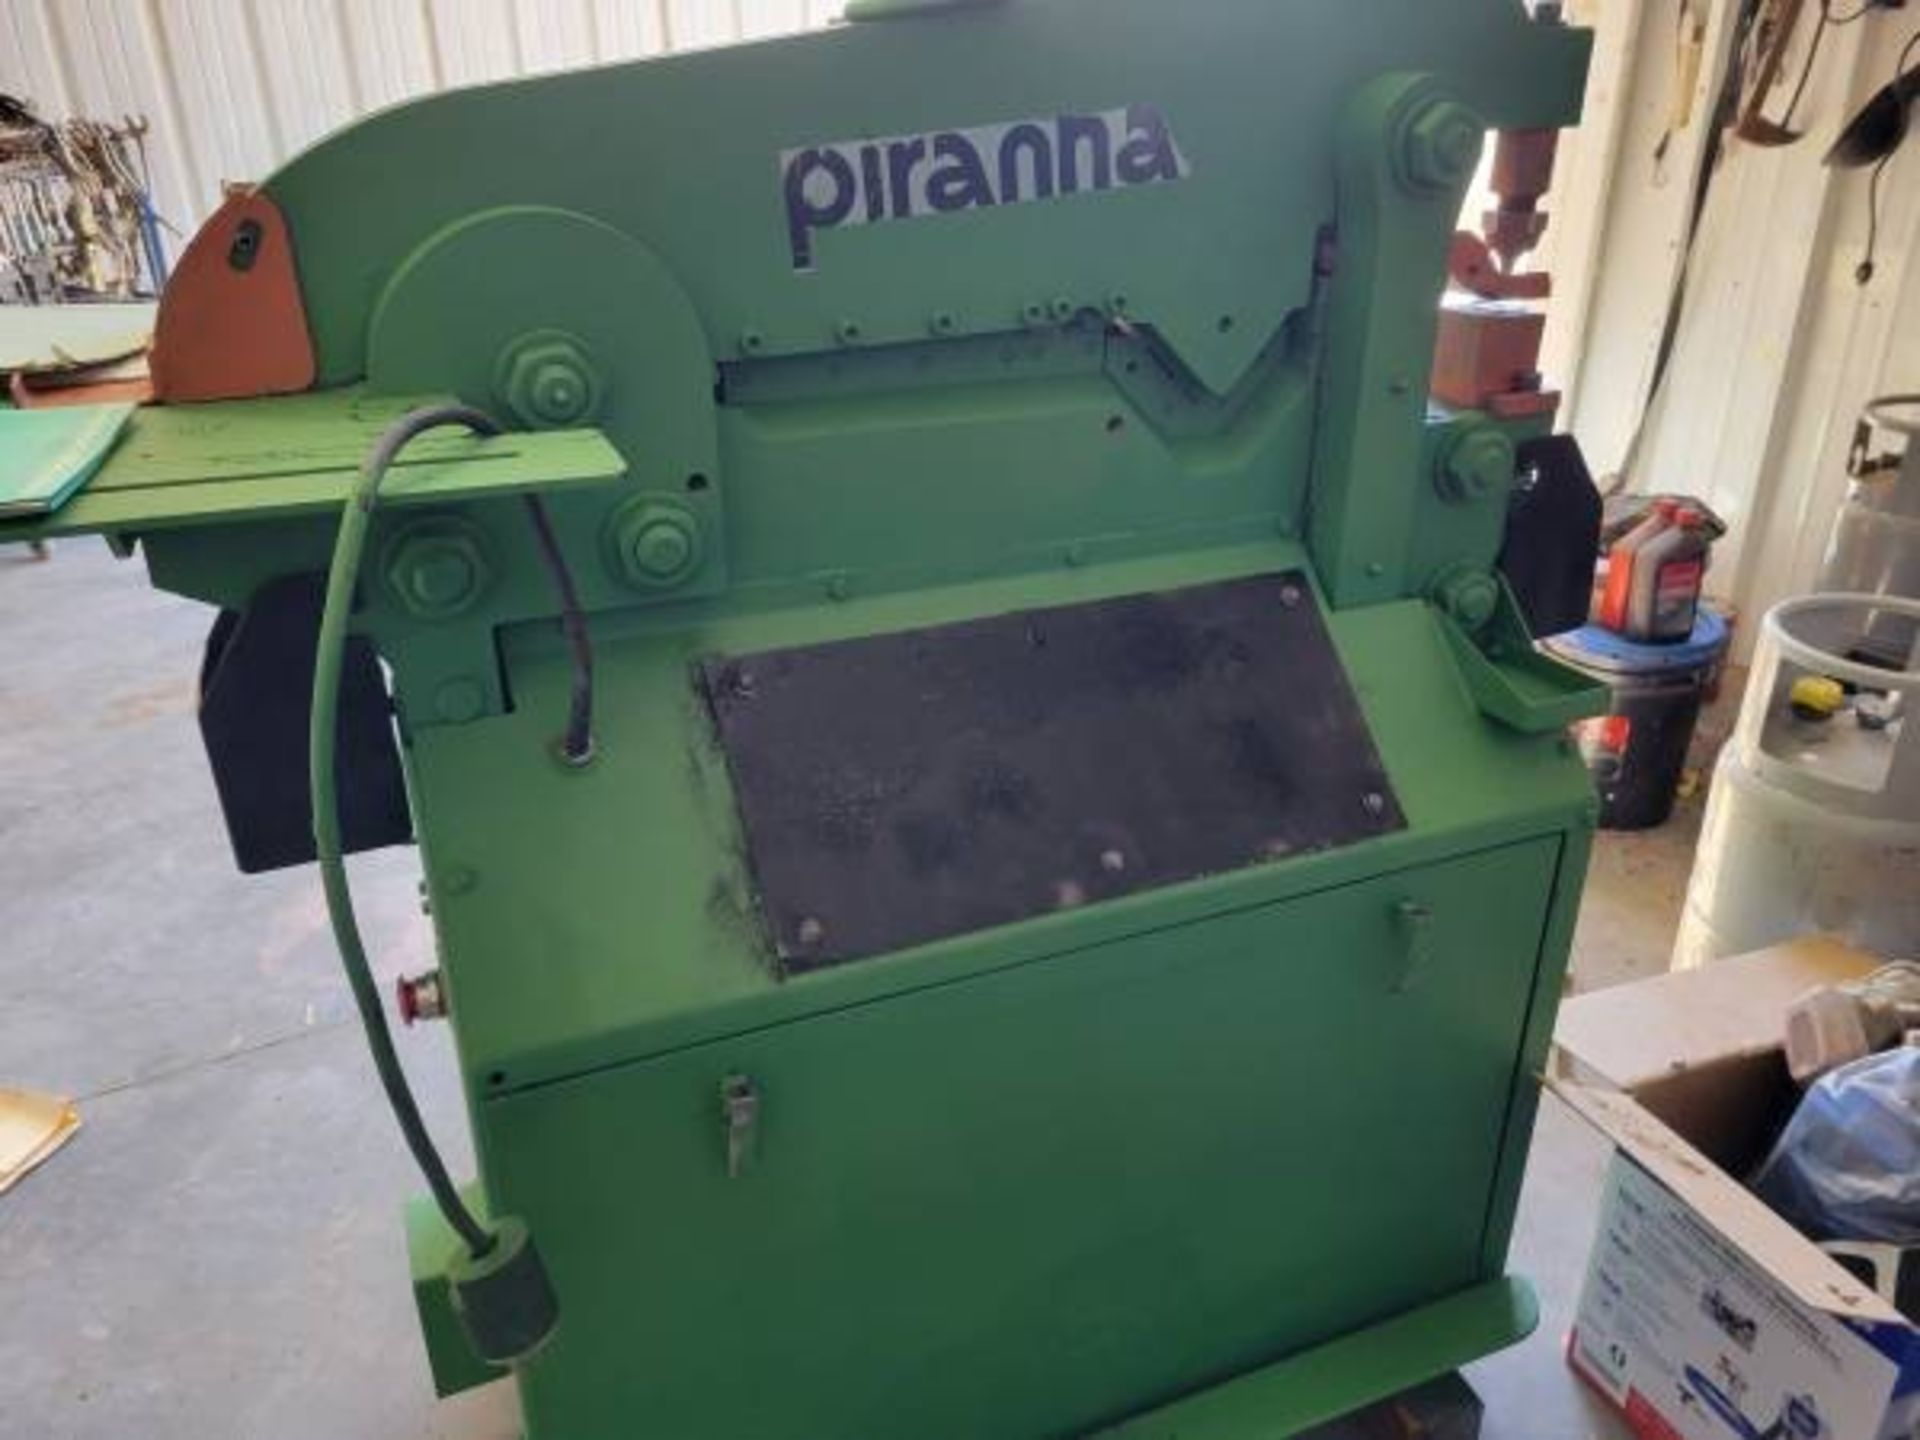 Piranah P36 Ironworker, S/N P2-221 (Located Laveen, AZ) - Image 6 of 8